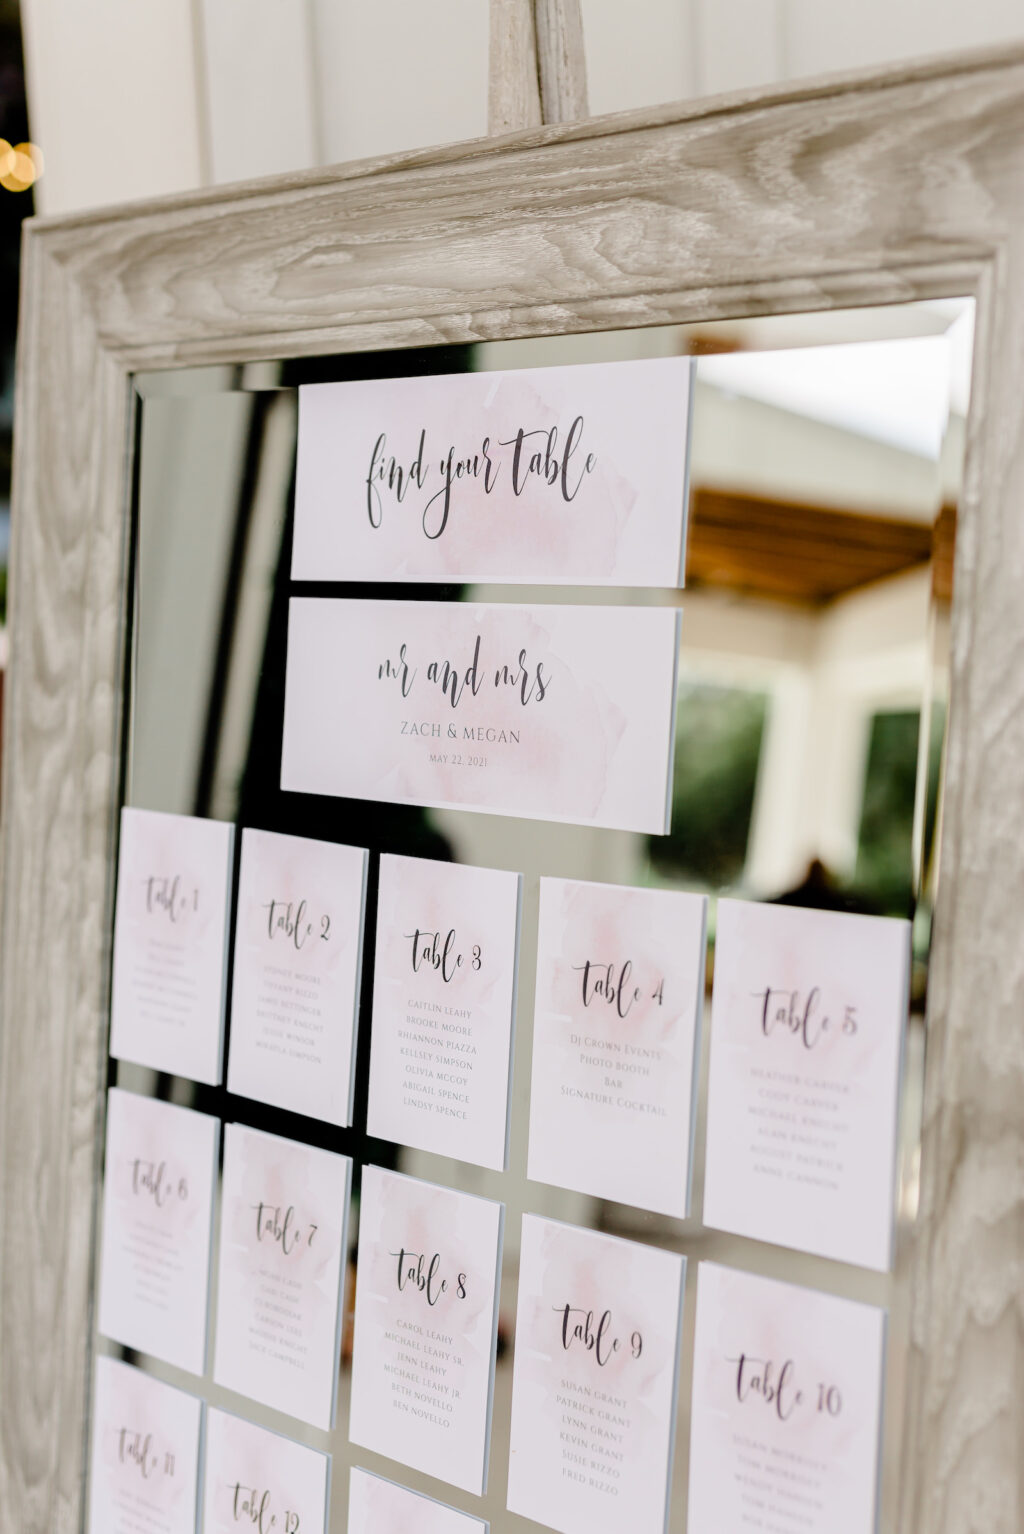 Rustic Wedding Seating Chart on Mirror with White Wood Frame